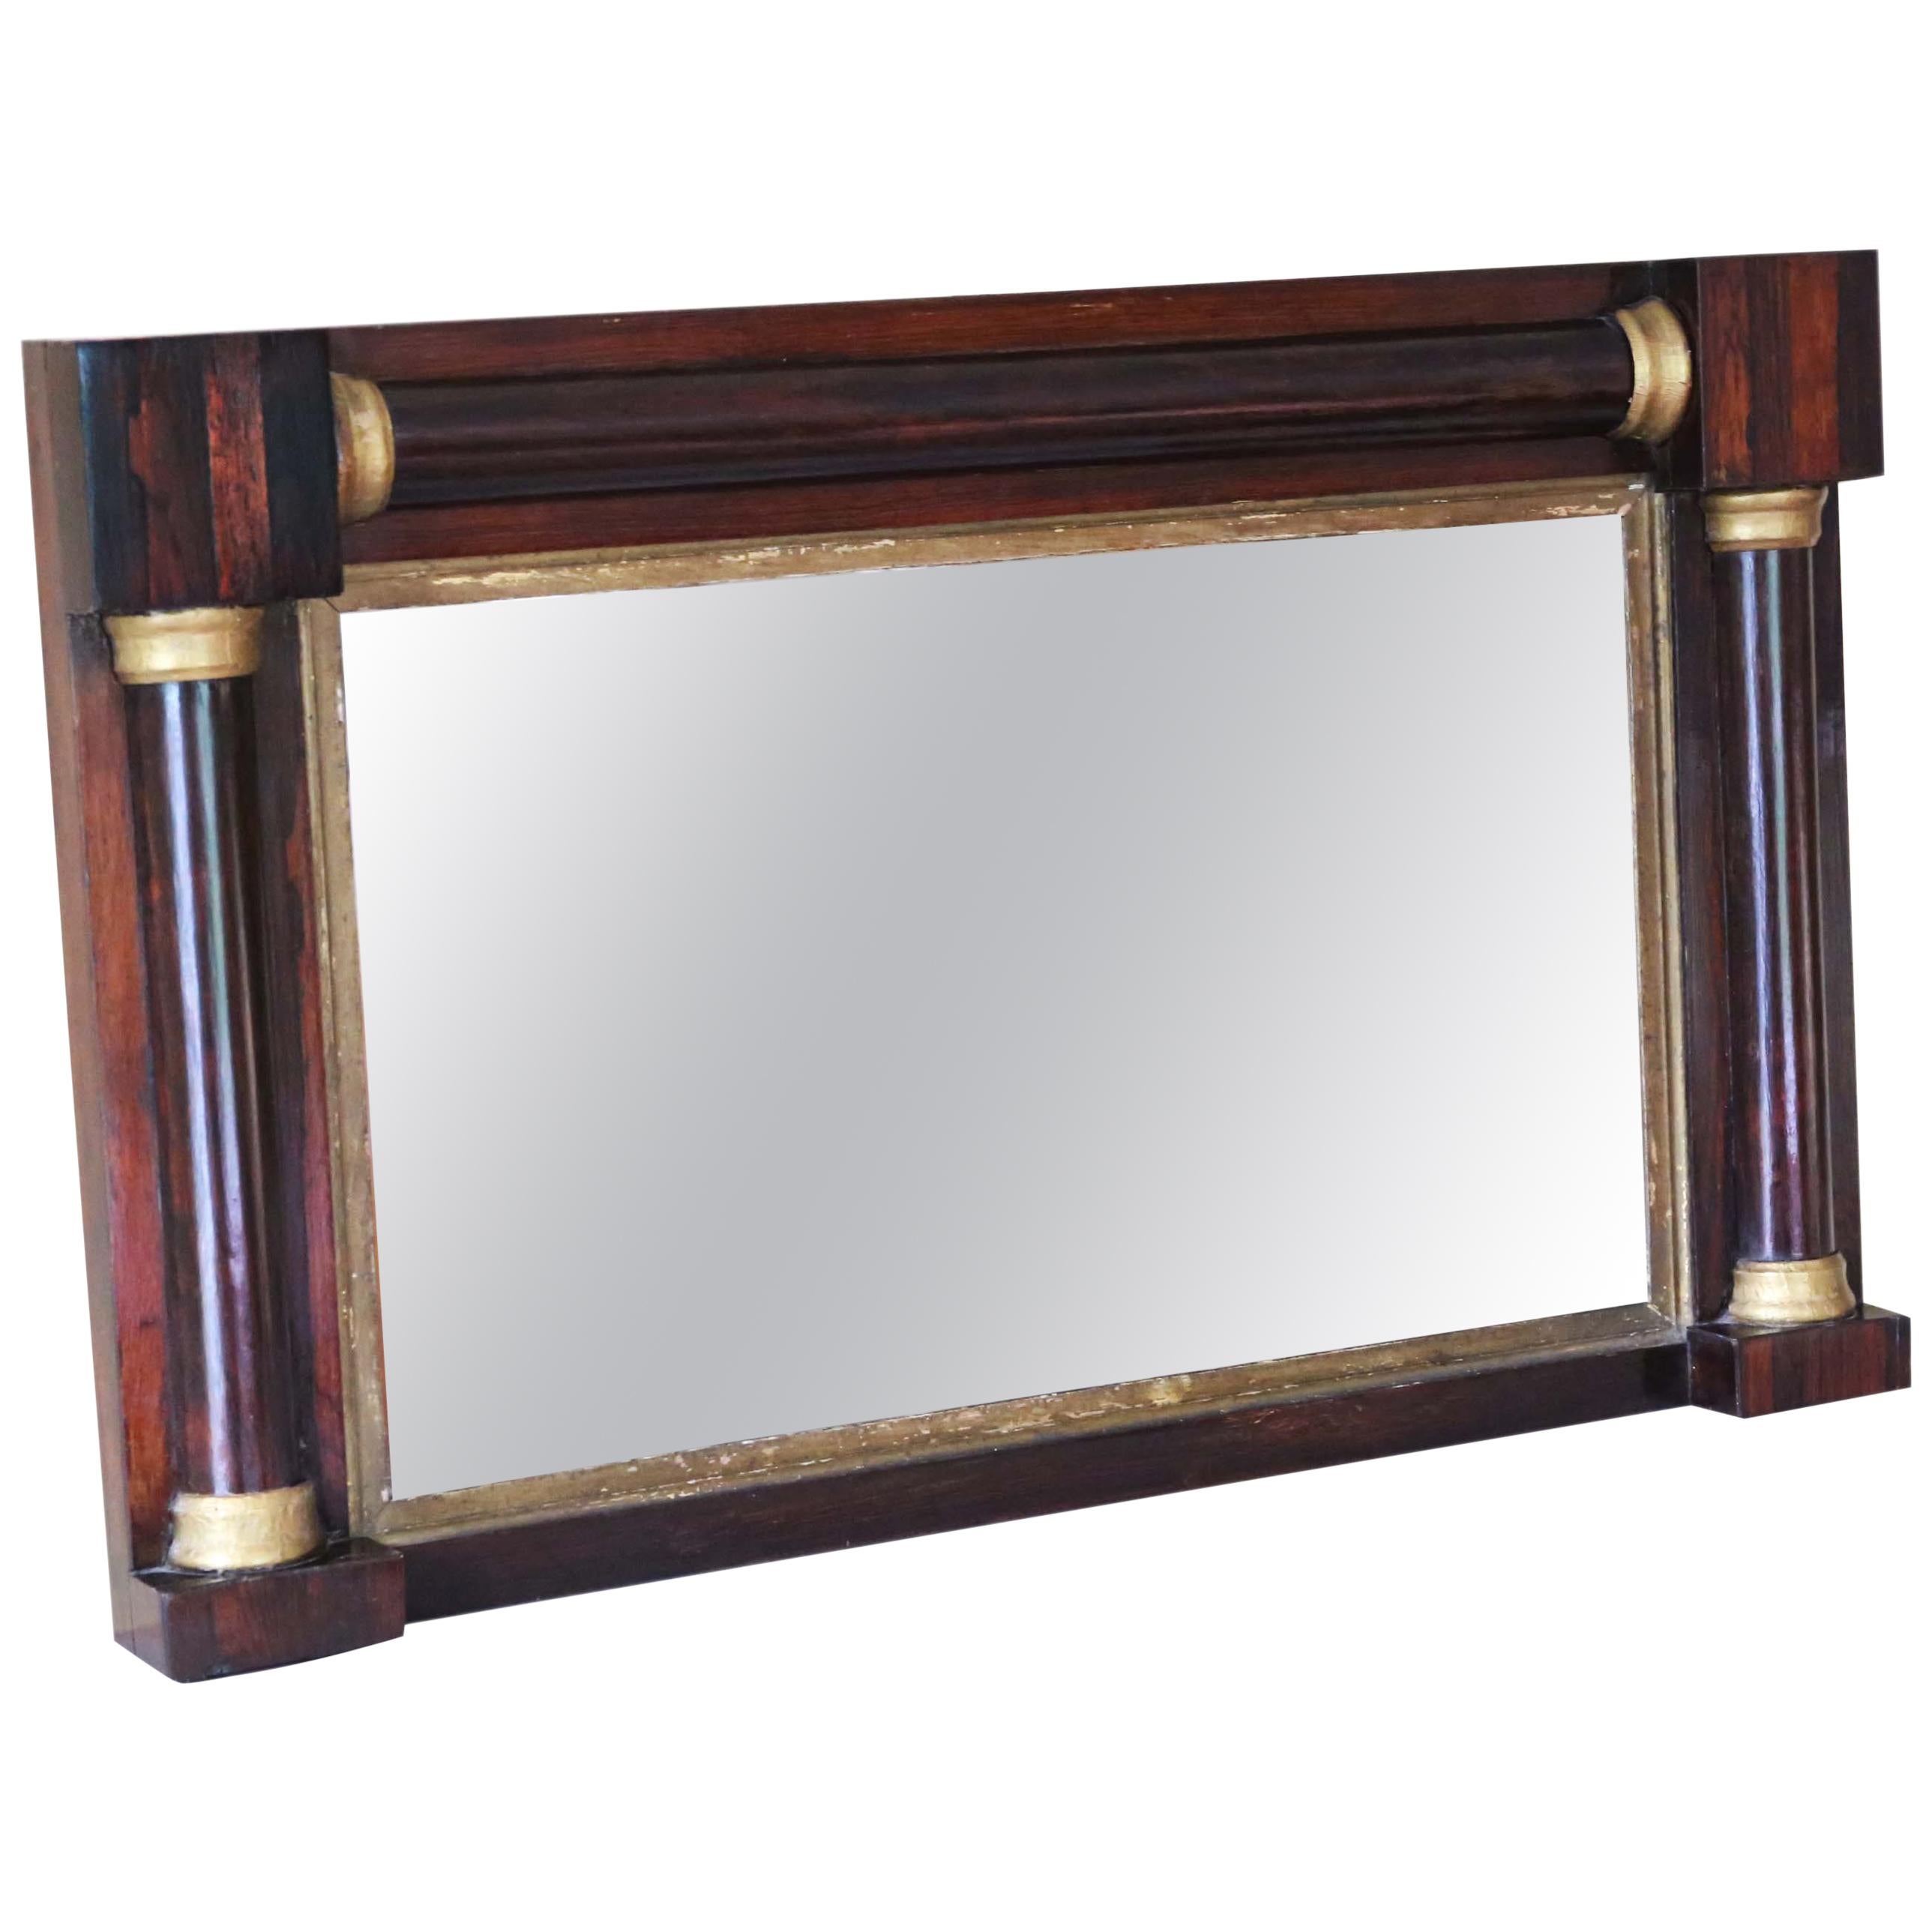 Antique Quality Regency Mahogany and Gilt Overmantle or Wall Mirror, circa 1825